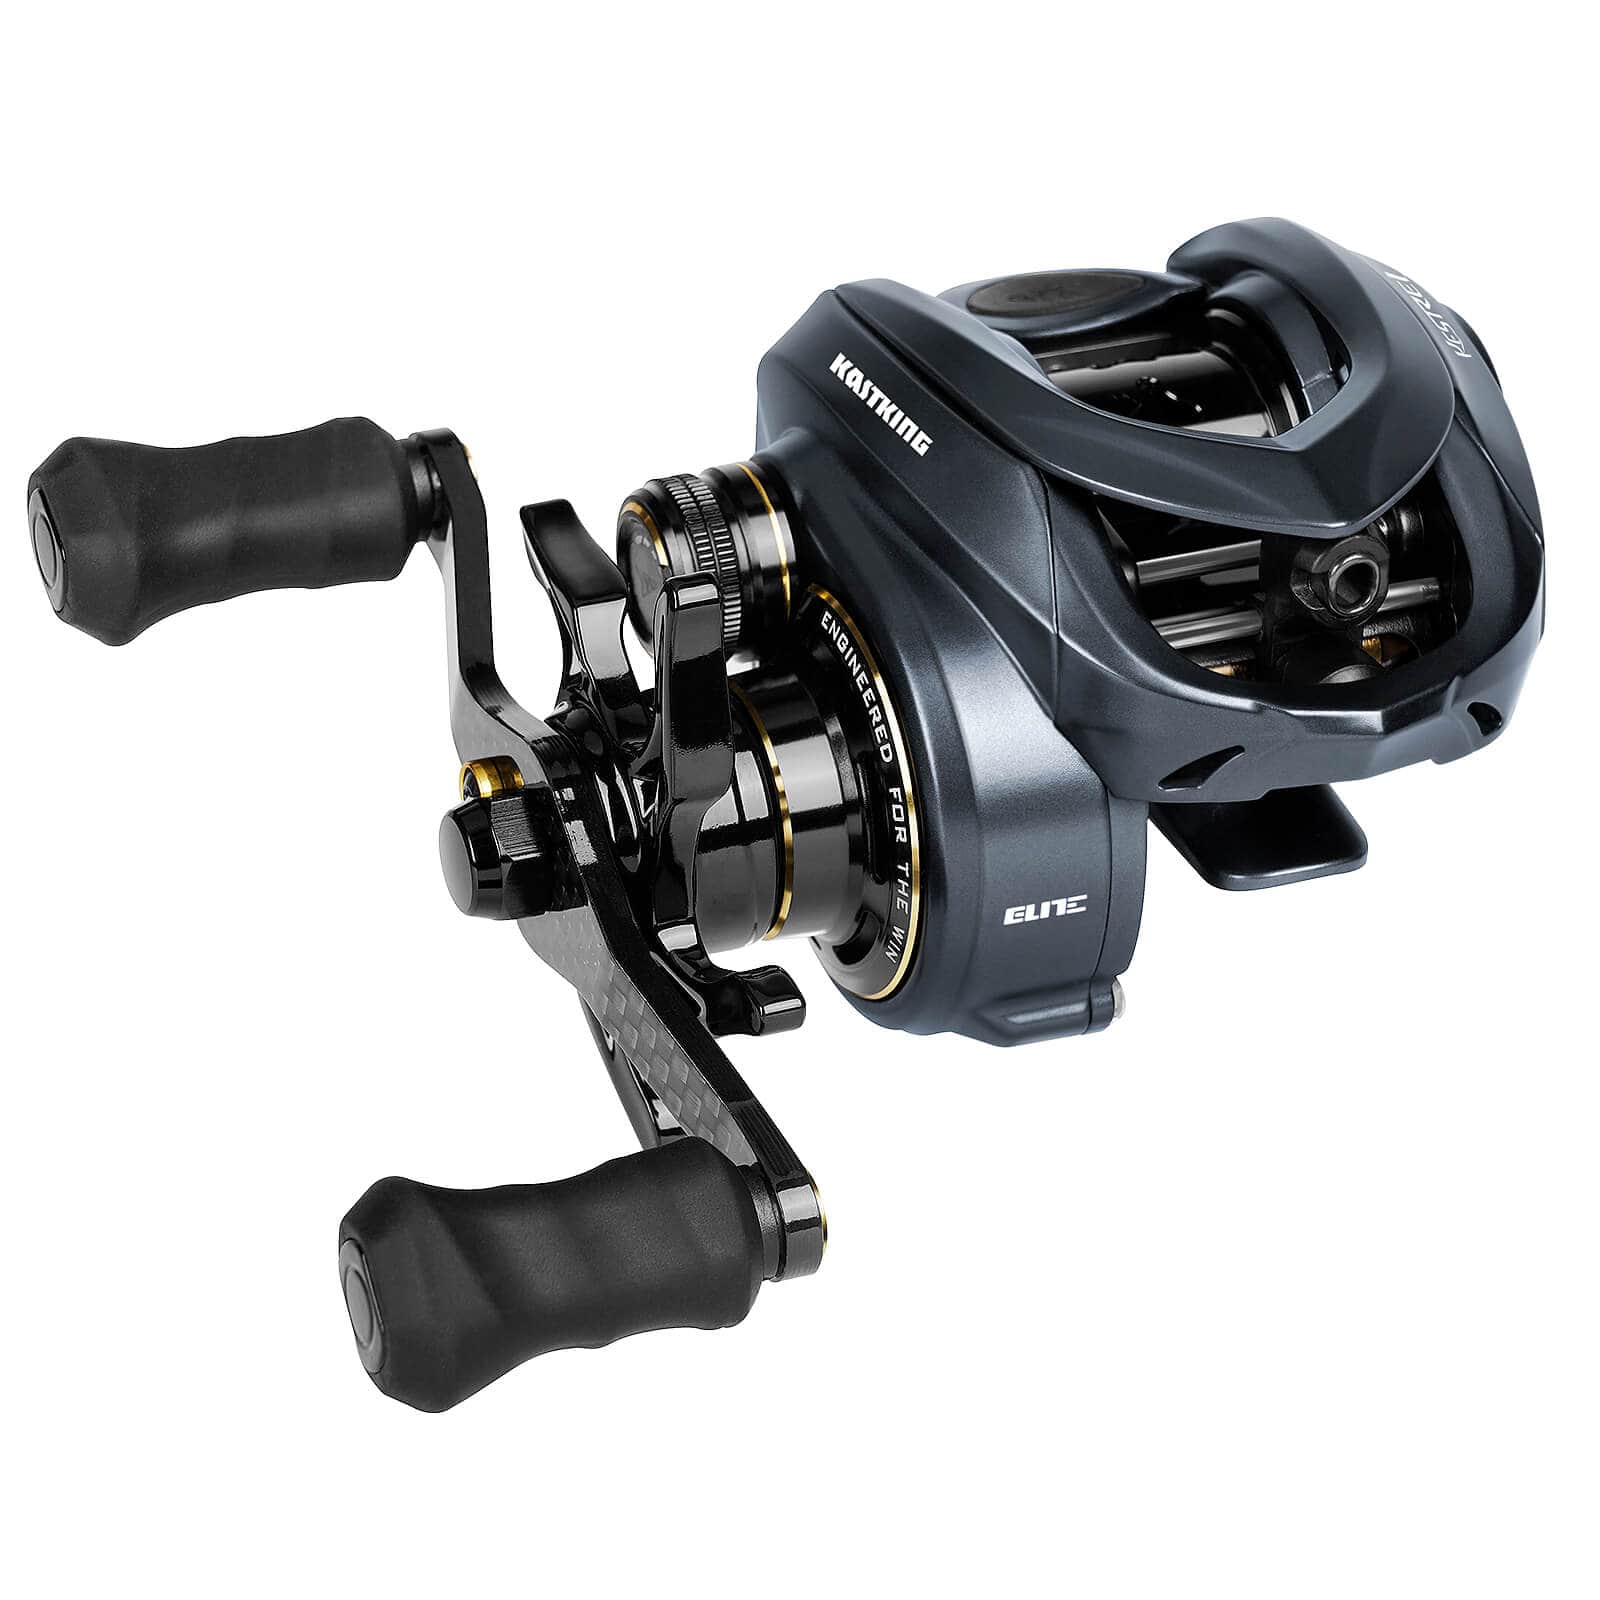 Upgrade Your Fishing Gear with the KastKing Sharky Baitfeeder III Spinning  Reel